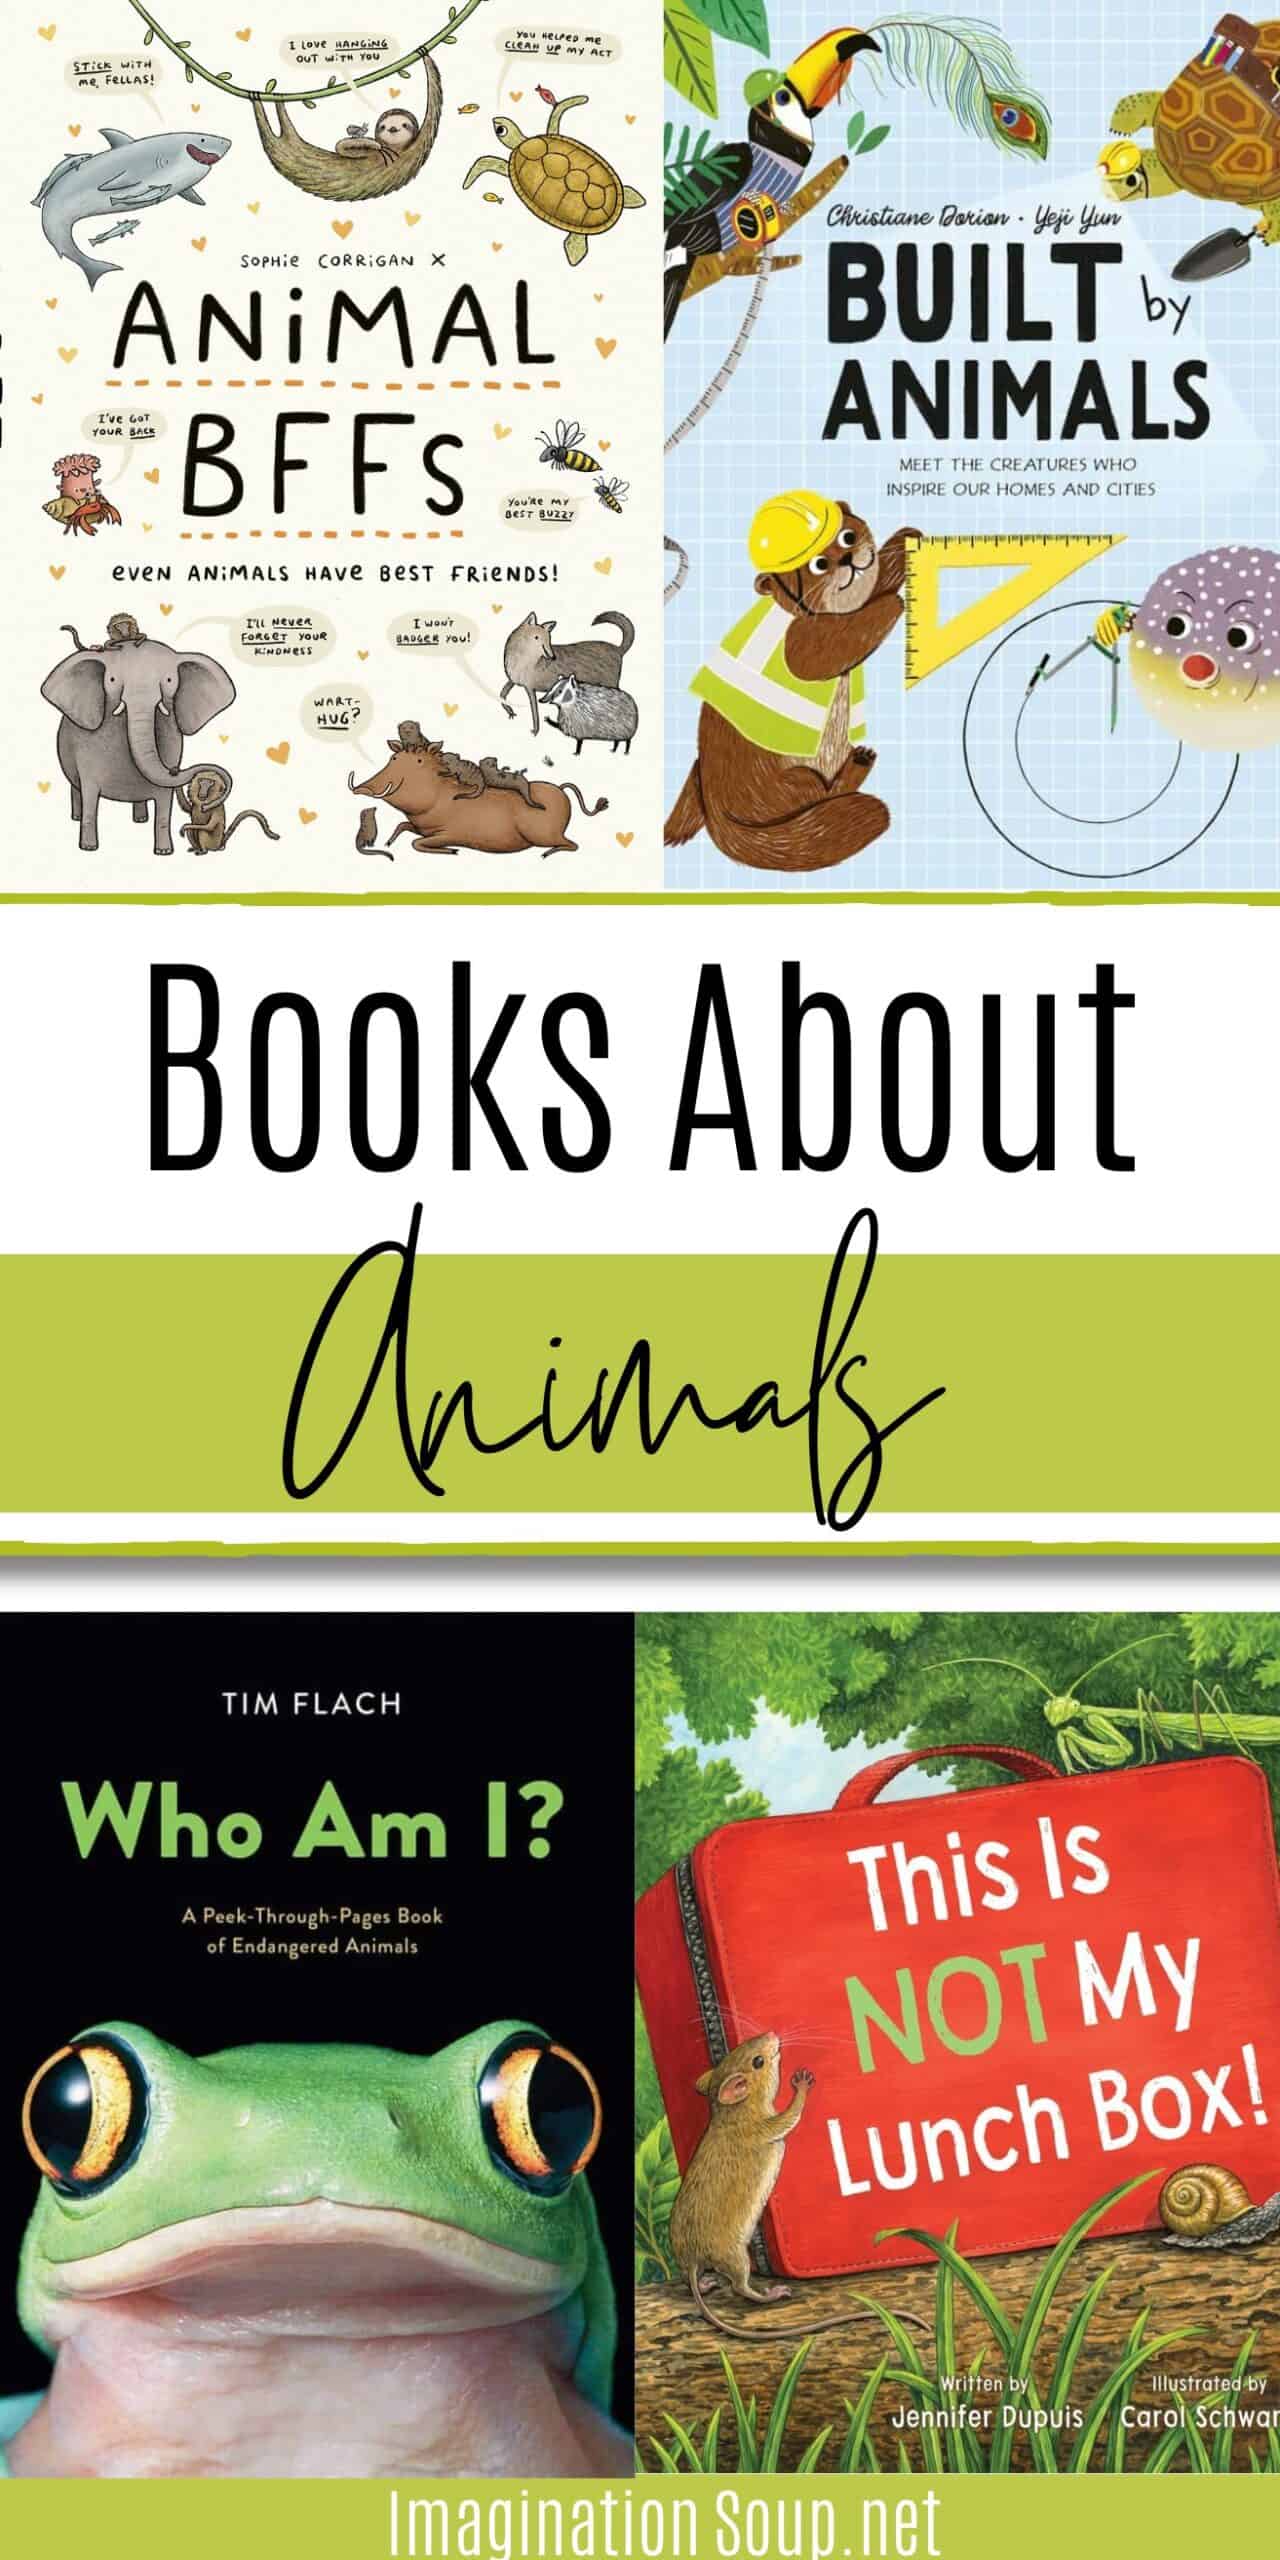 BOOKS ABOUT ANIMALS